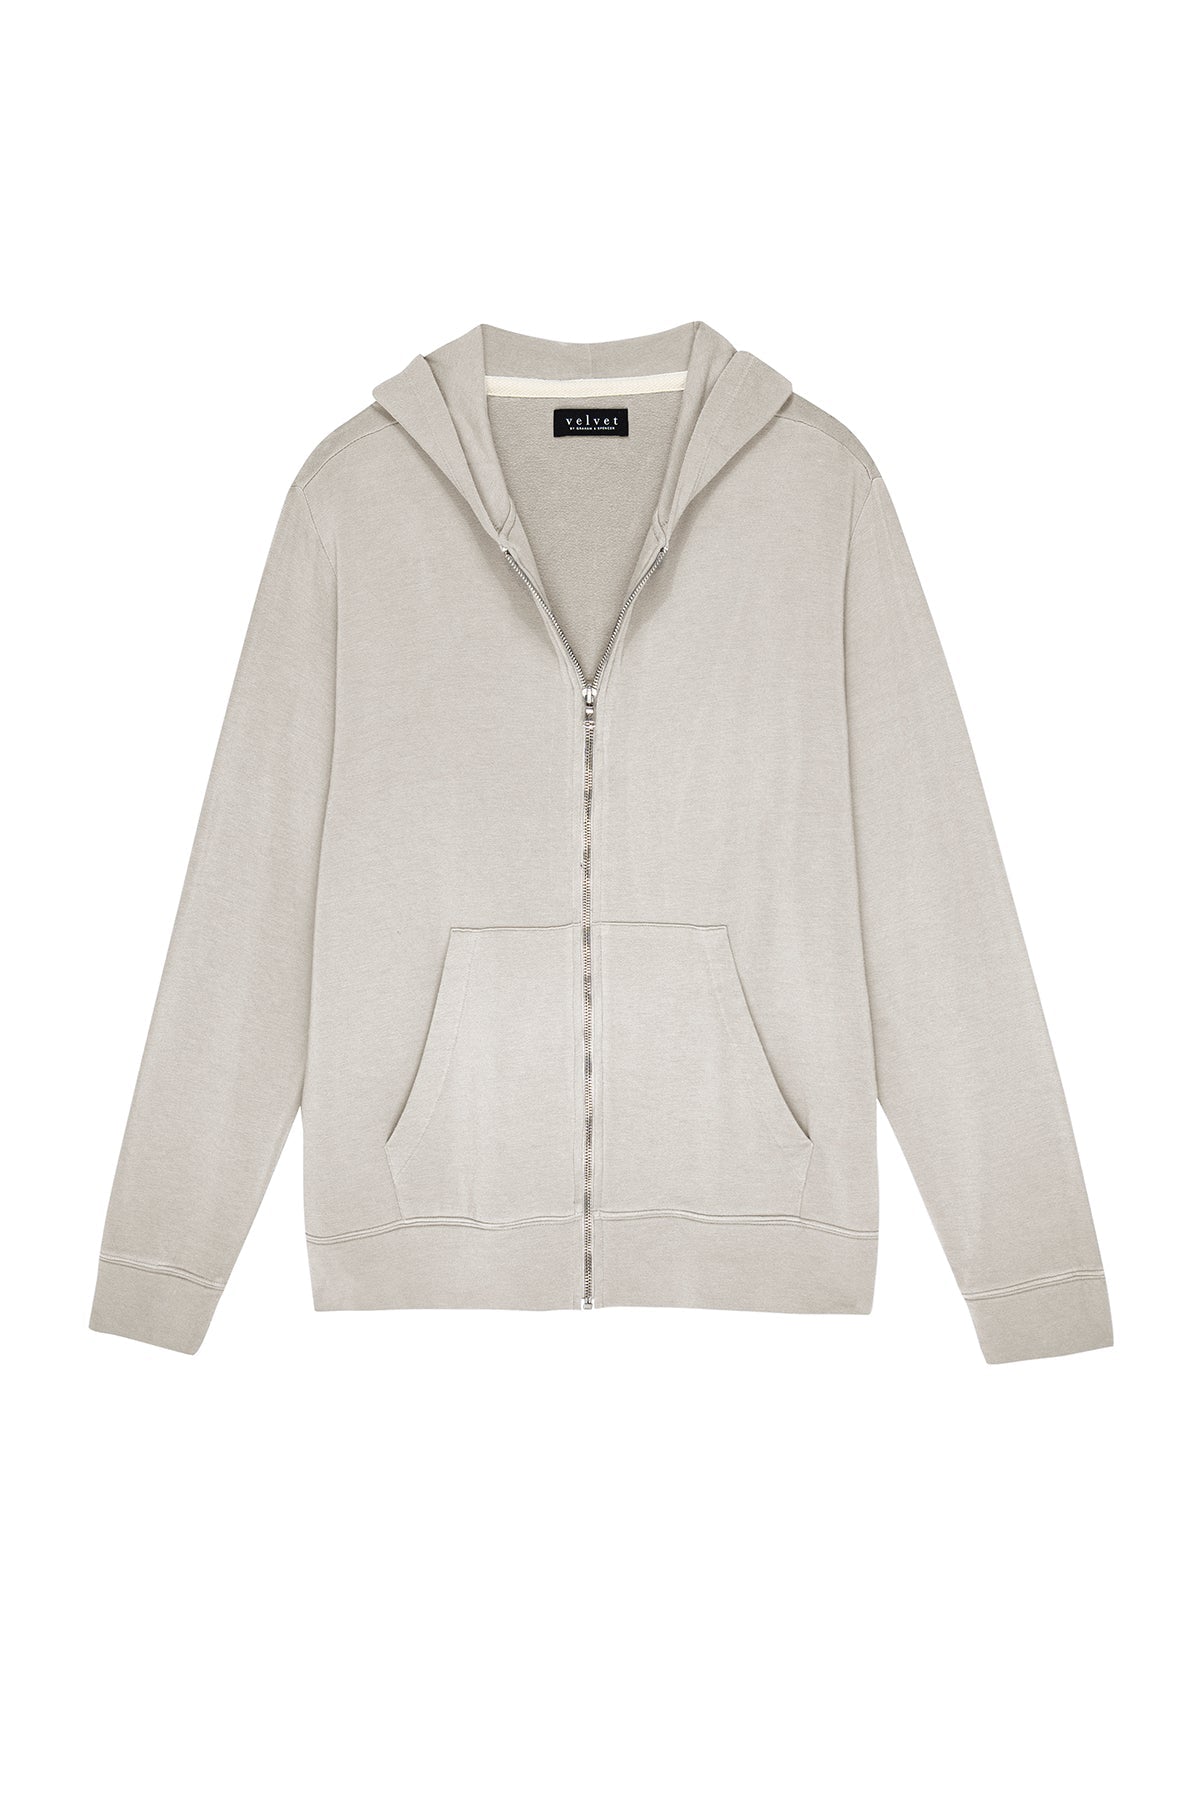   A RODAN LUXE FLEECE ZIP HOODIE by Velvet by Graham & Spencer, with a zippered hood, perfect for gym-class. 